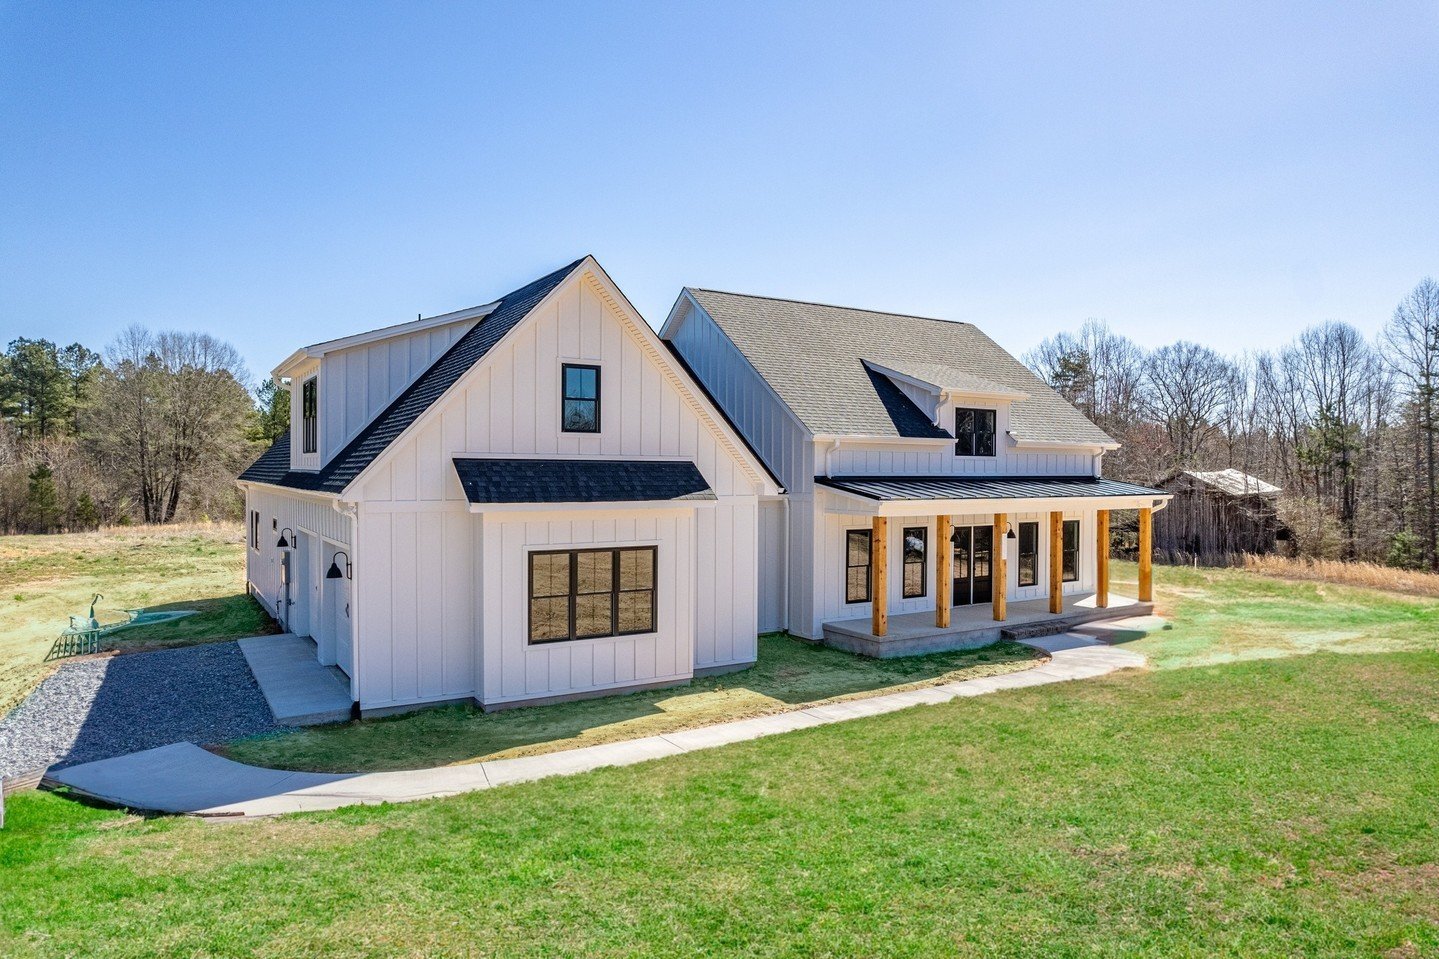 Presenting our latest project: a modern farmhouse that perfectly blends rustic charm with contemporary elegance. Every detail crafted for comfort and style.⁠
⁠
Do you love this style home? ⁠
⁠
#modernfarmhouse #customhomedesign #customhome #customhom